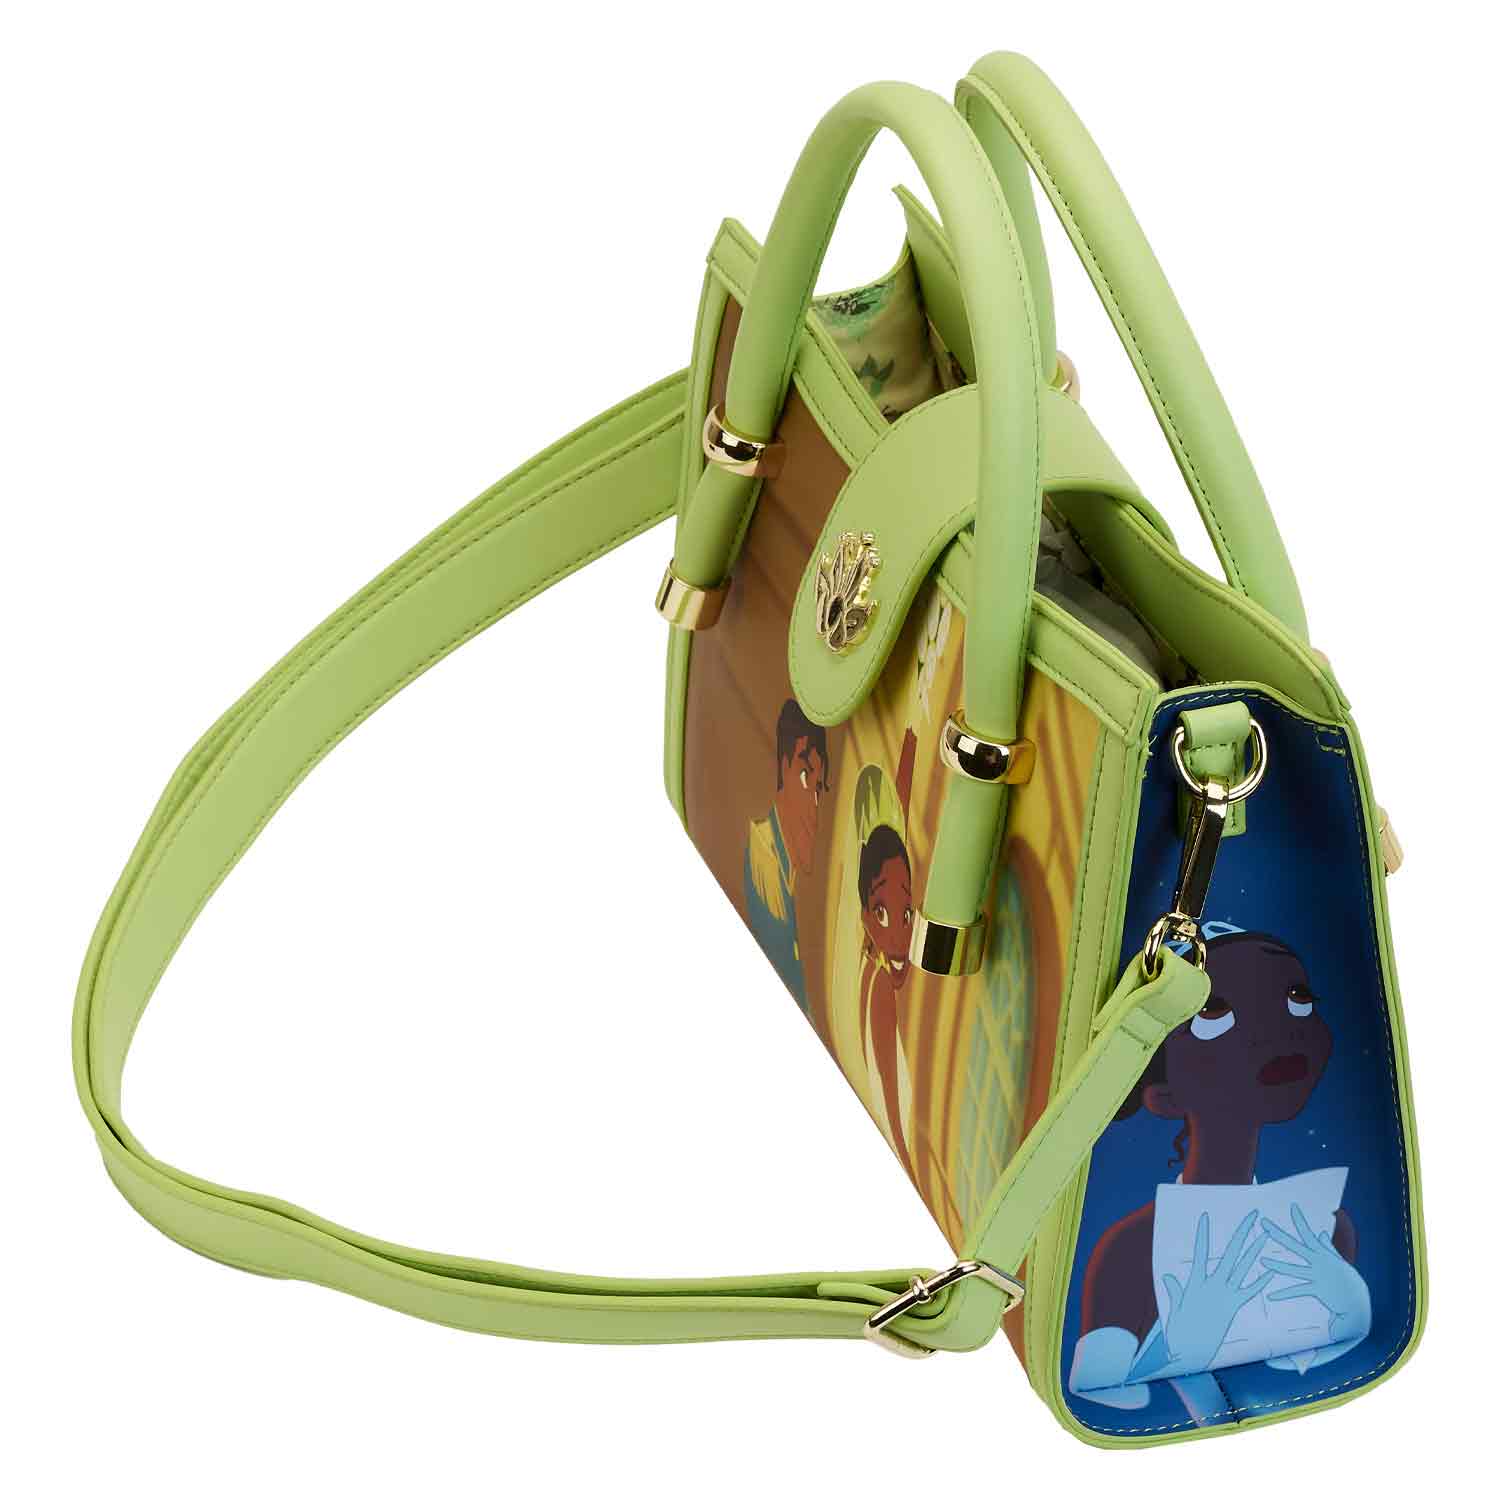 Loungefly x Disney The Princess and The Frog Scenes Crossbody Bag - GeekCore